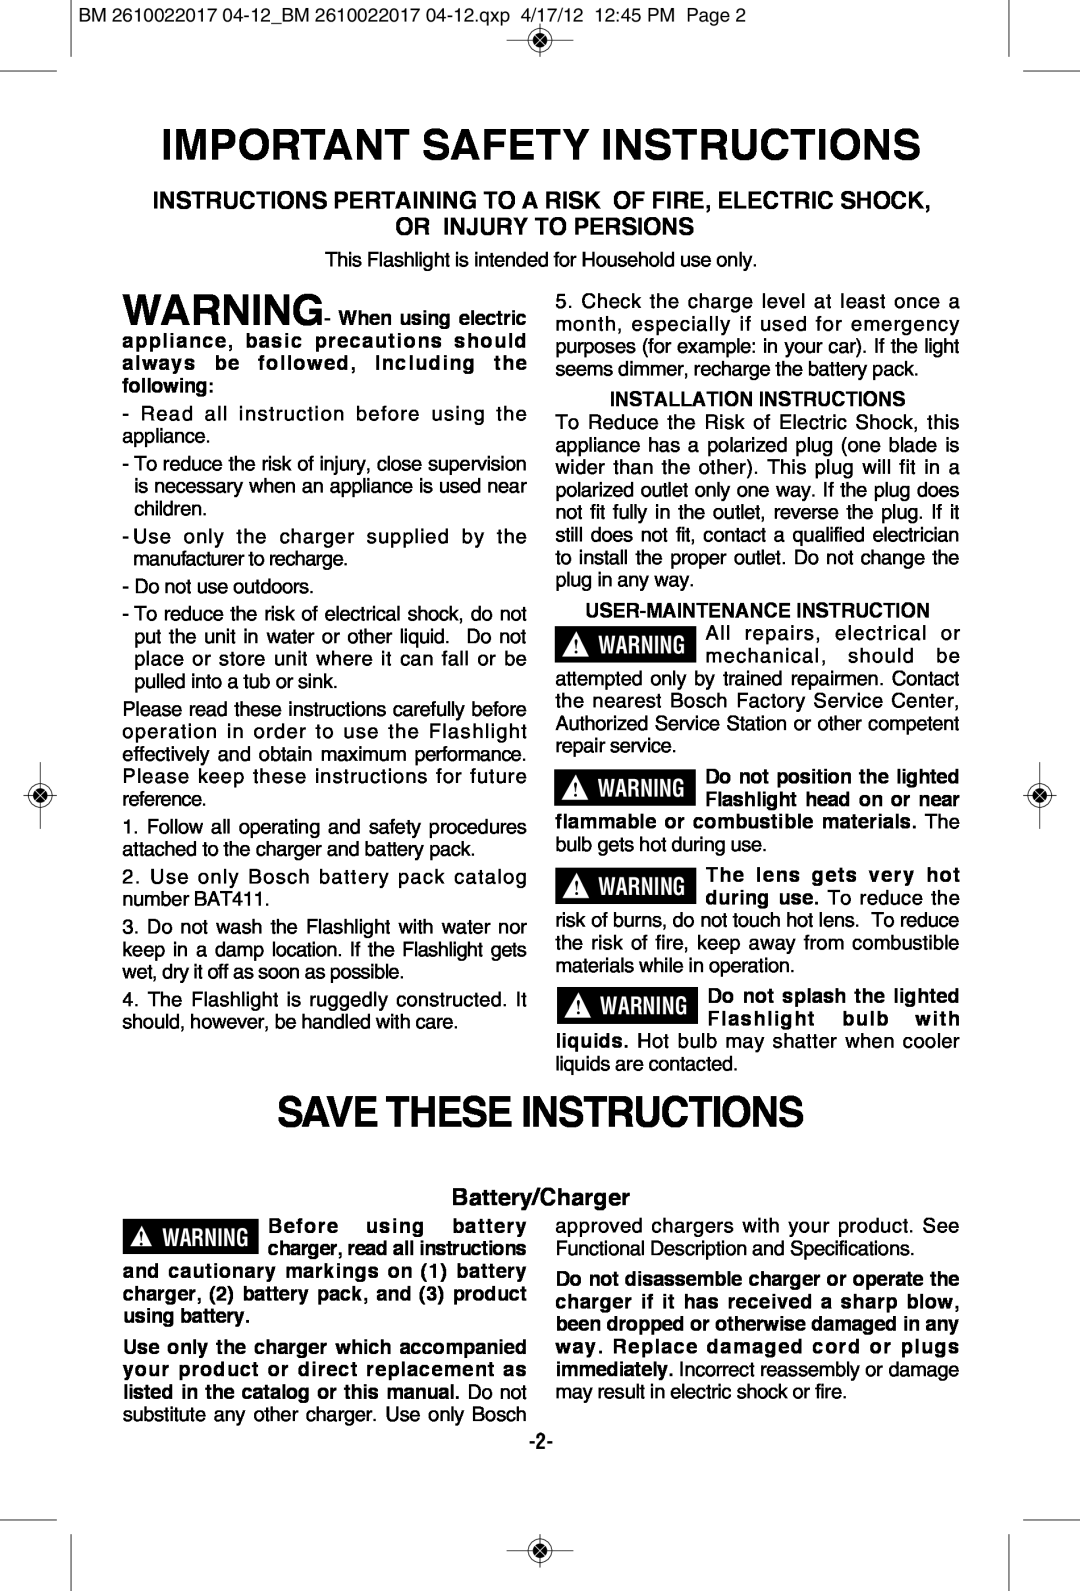 Bosch Power Tools FL11A Important Safety Instructions, Save These Instructions, Or Injury To Persions, Battery/Charger 